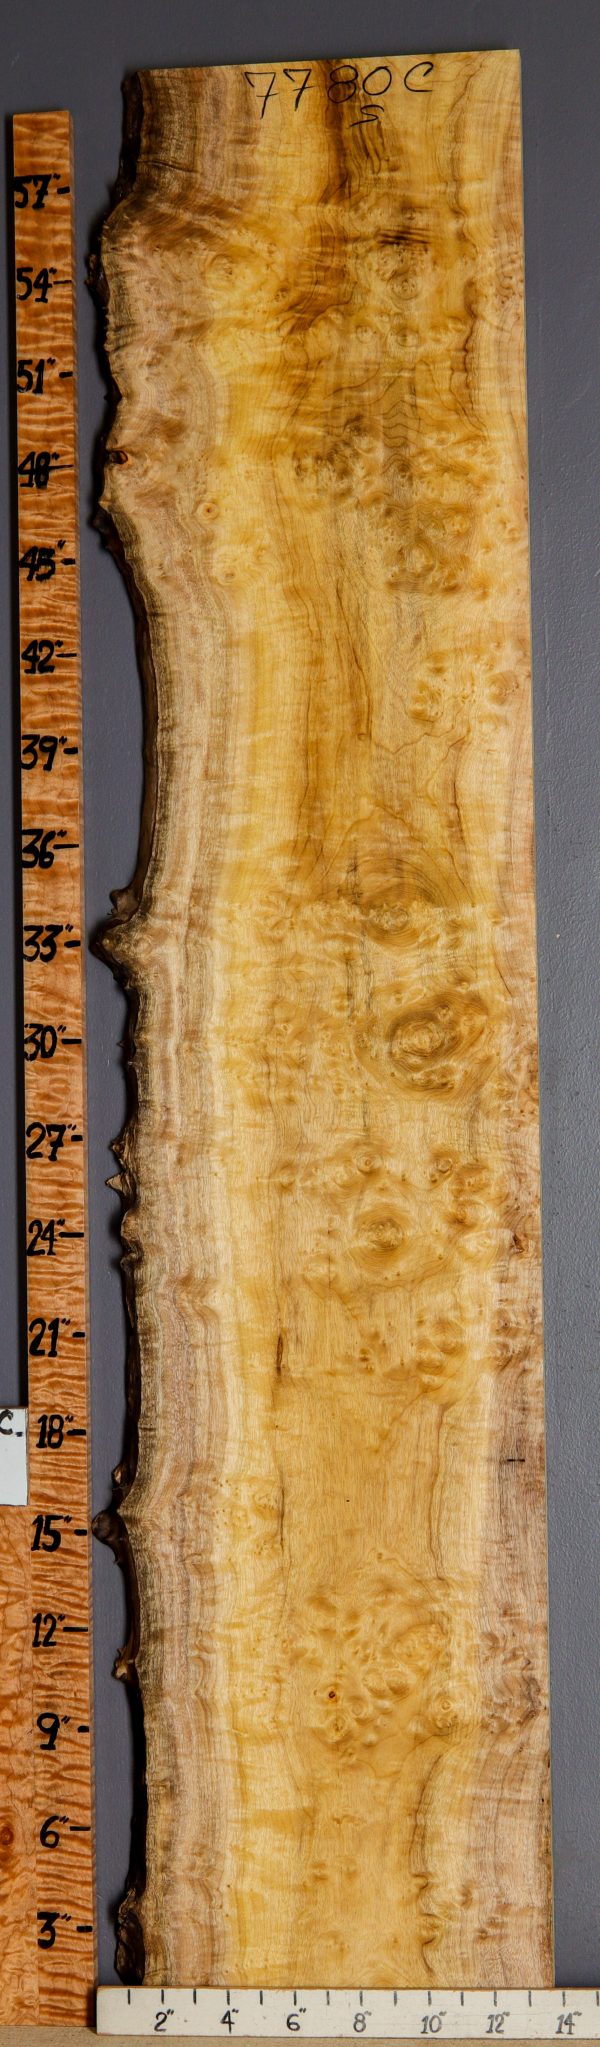 5A Burl Myrtlewood Lumber with Live Edge 12" X 60" X 5/4 (NWT-7780C)